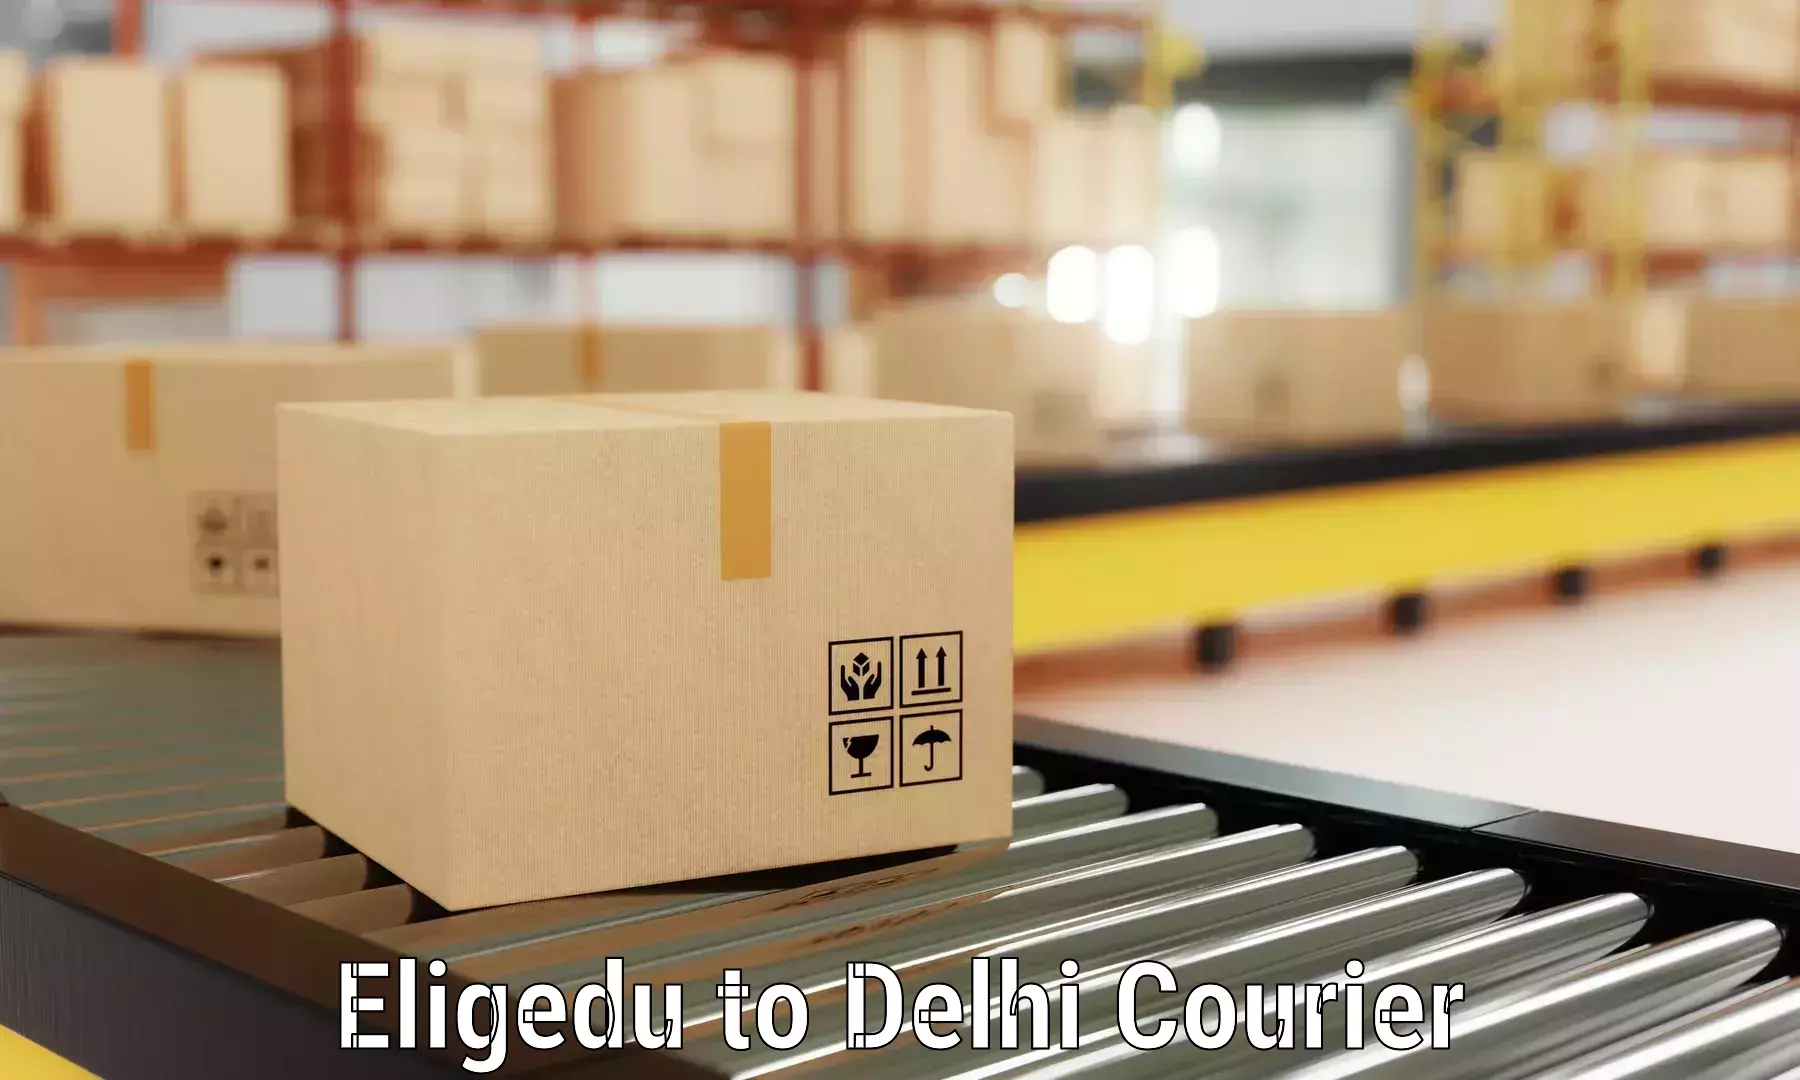 Efficient packing and moving Eligedu to Ashok Vihar